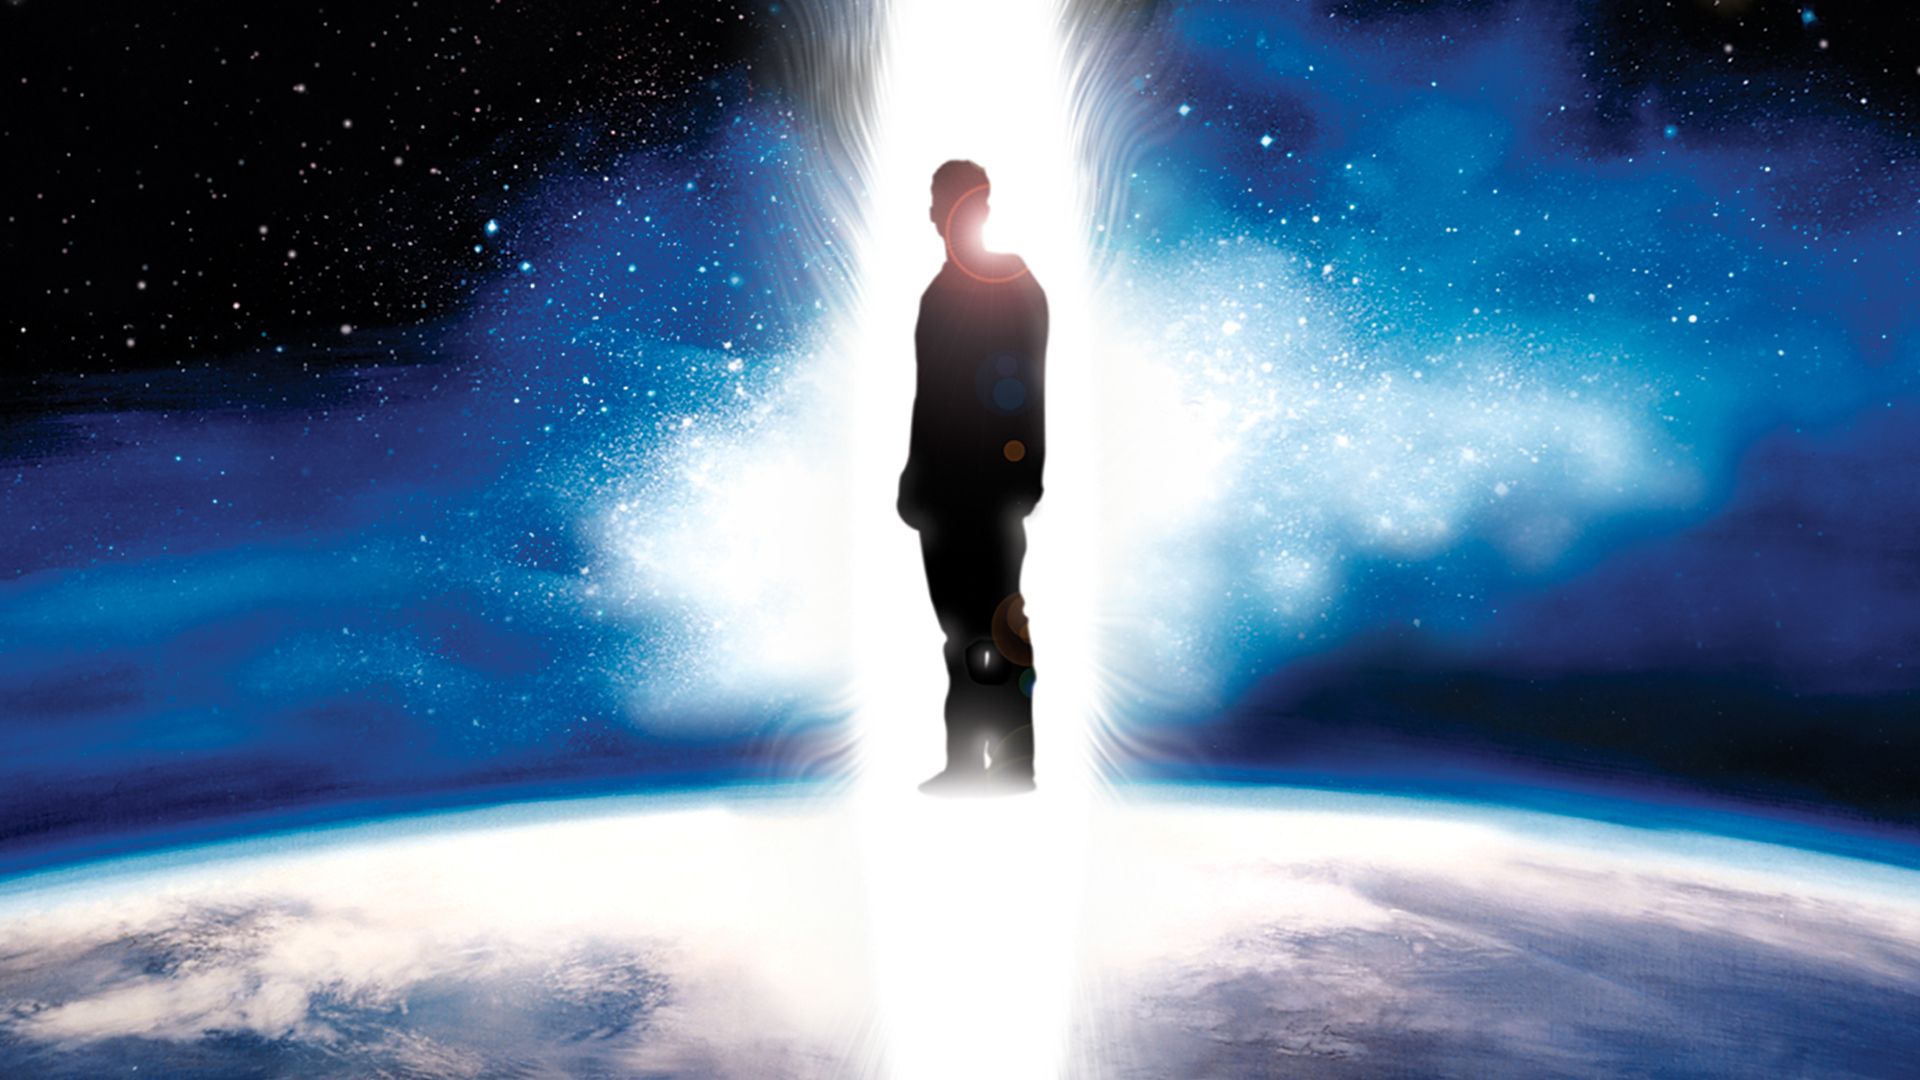 The Man from Earth background